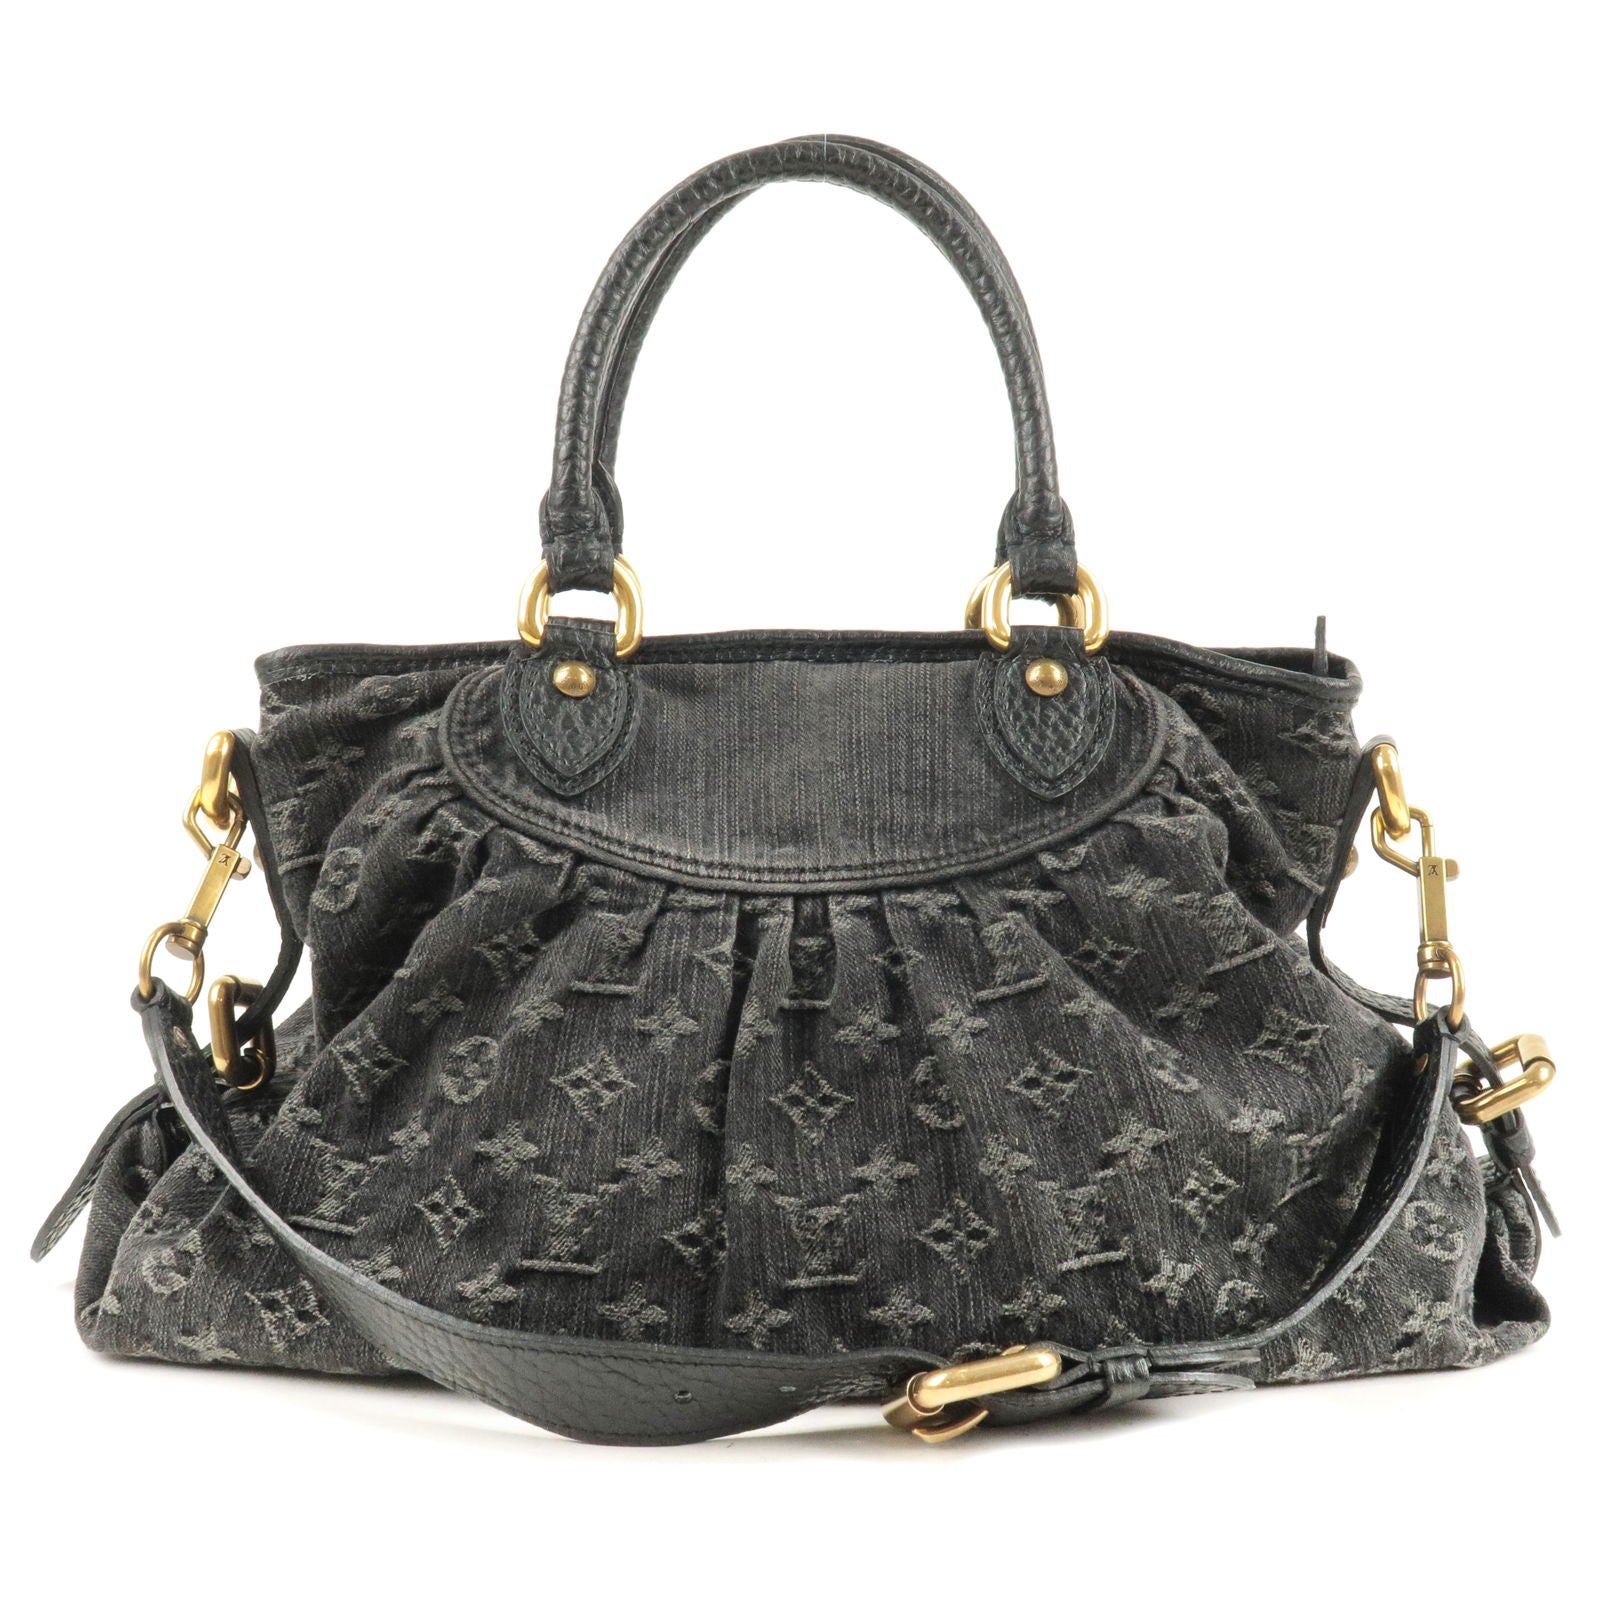 Authentic Louis Vuitton Denim Neo Speedy in Gorgeous pre-owned cond